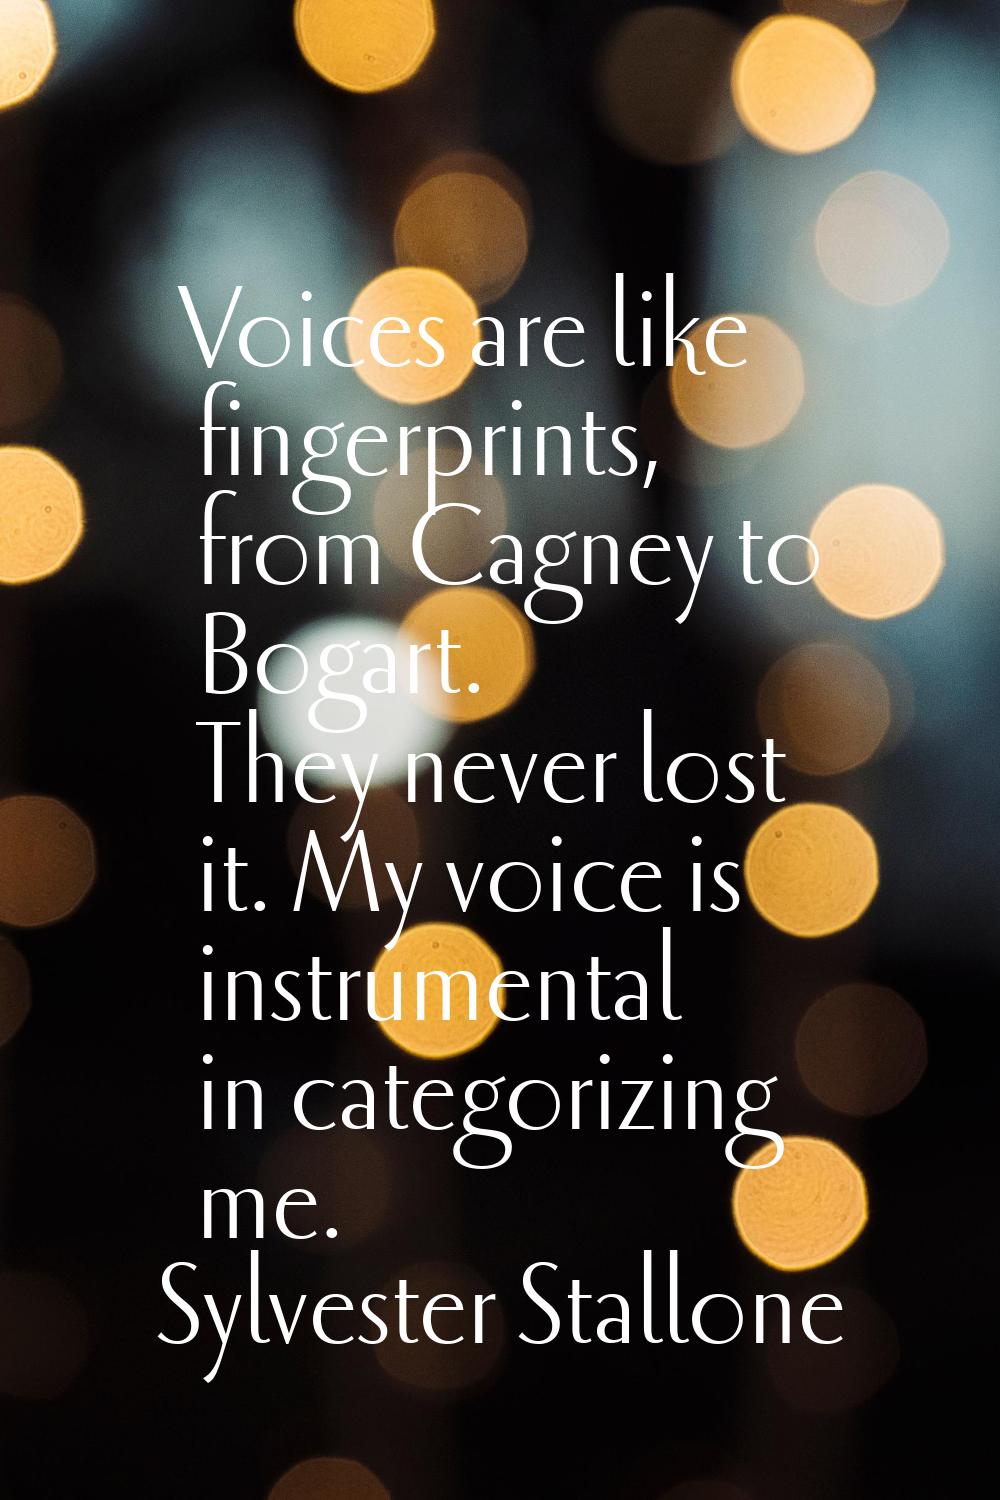 Voices are like fingerprints, from Cagney to Bogart. They never lost it. My voice is instrumental i